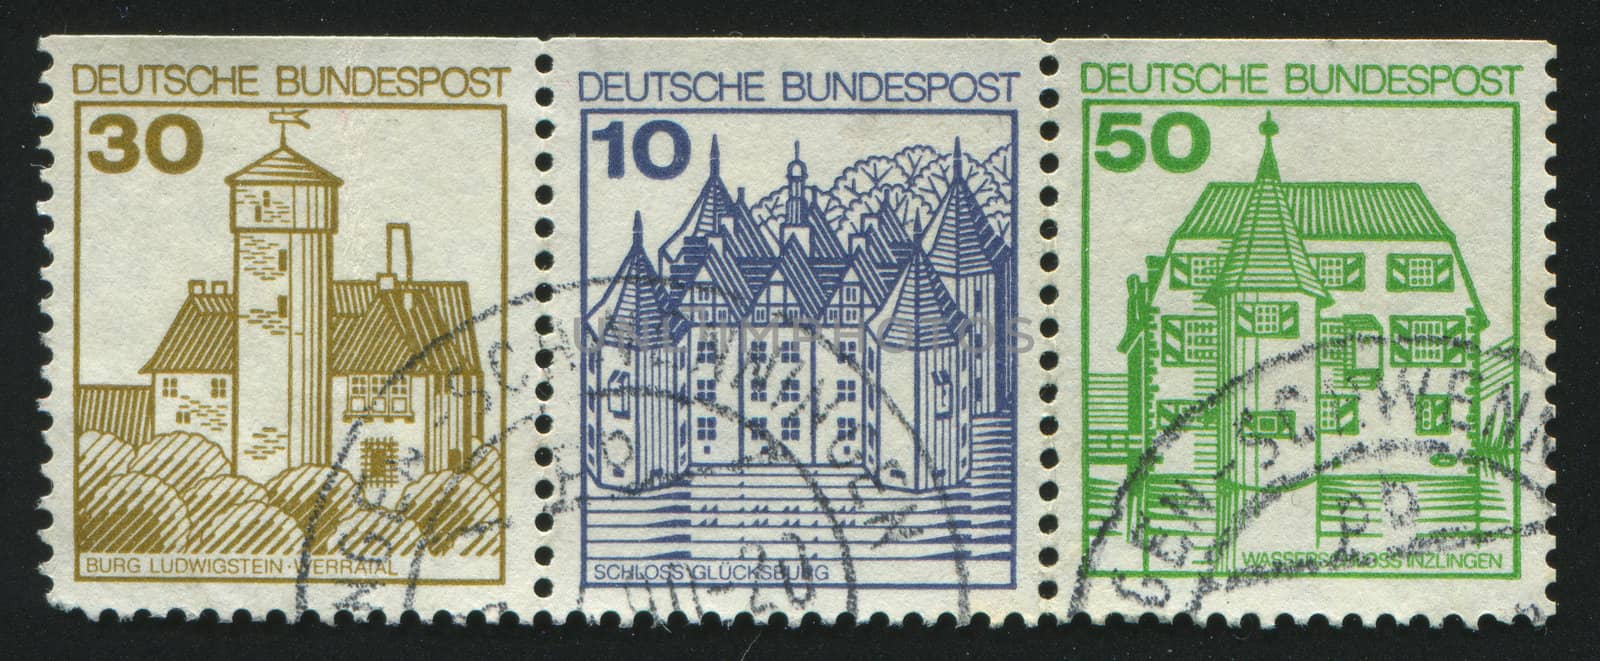 GERMANY  - CIRCA 1977: stamp printed by Germany, shows old castle, circa 1977.